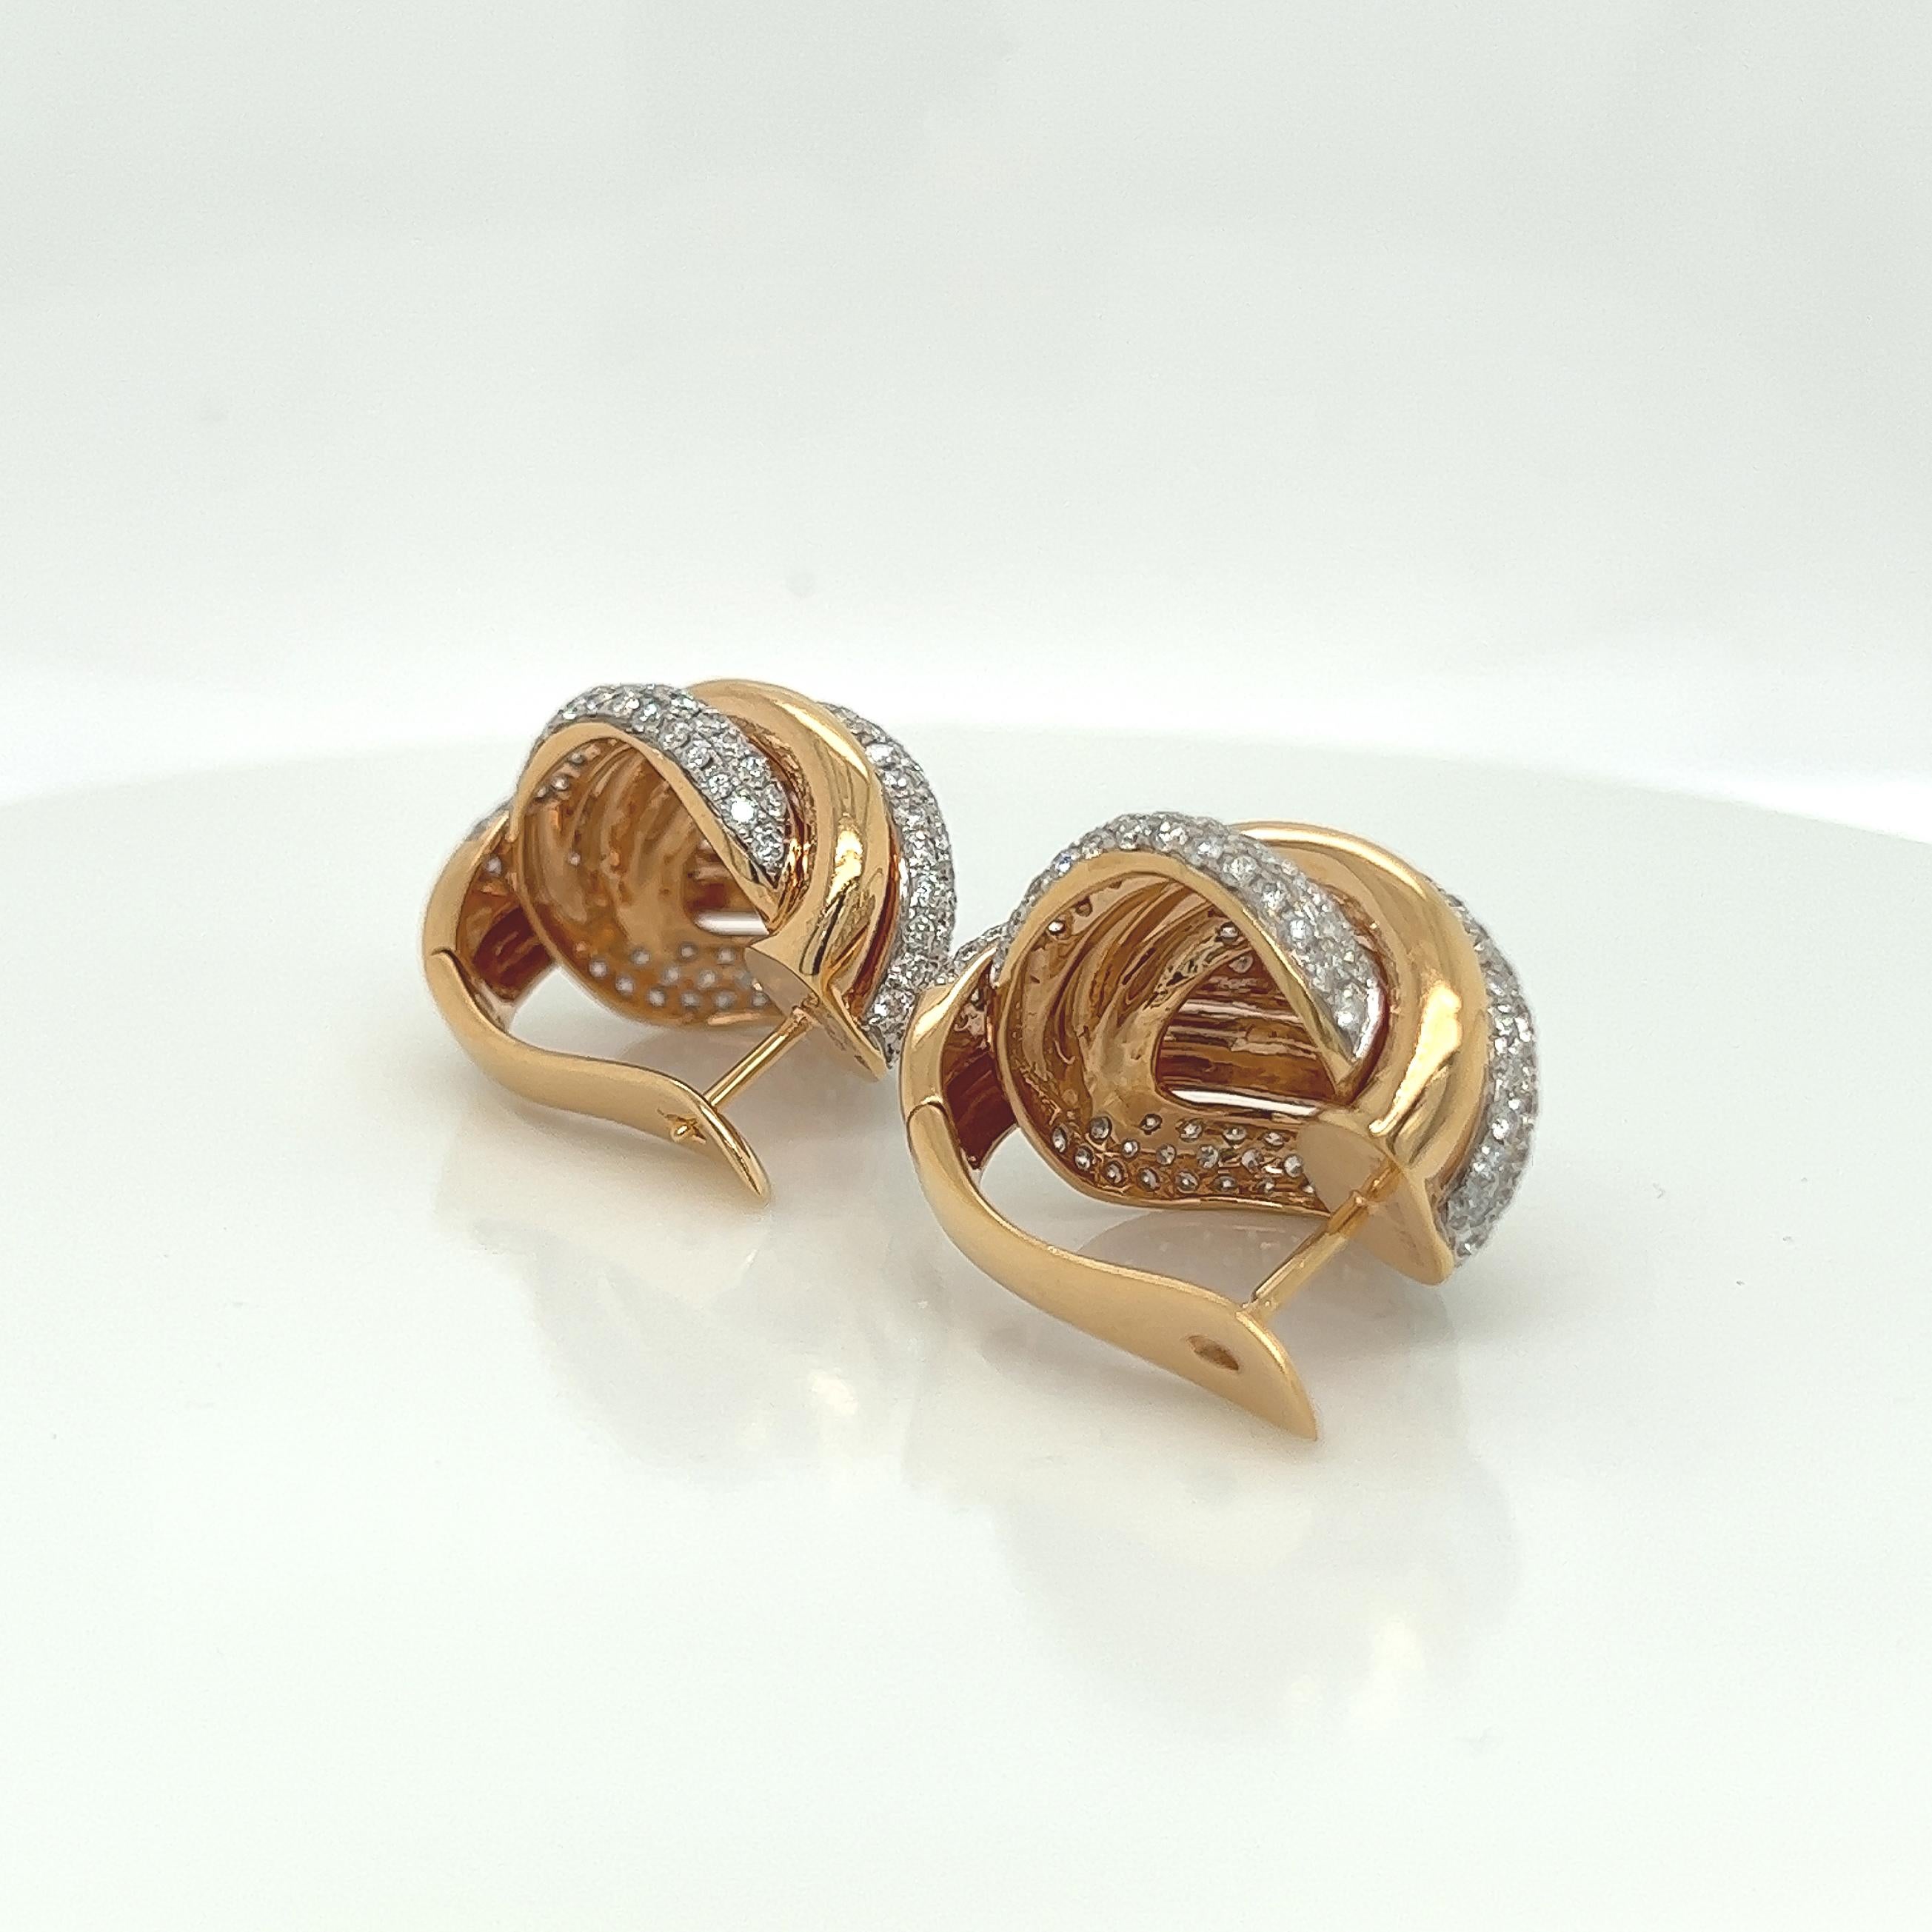 4.25 Carat Diamond and Gold Earrings in 18K Rose Gold In New Condition For Sale In New York, NY